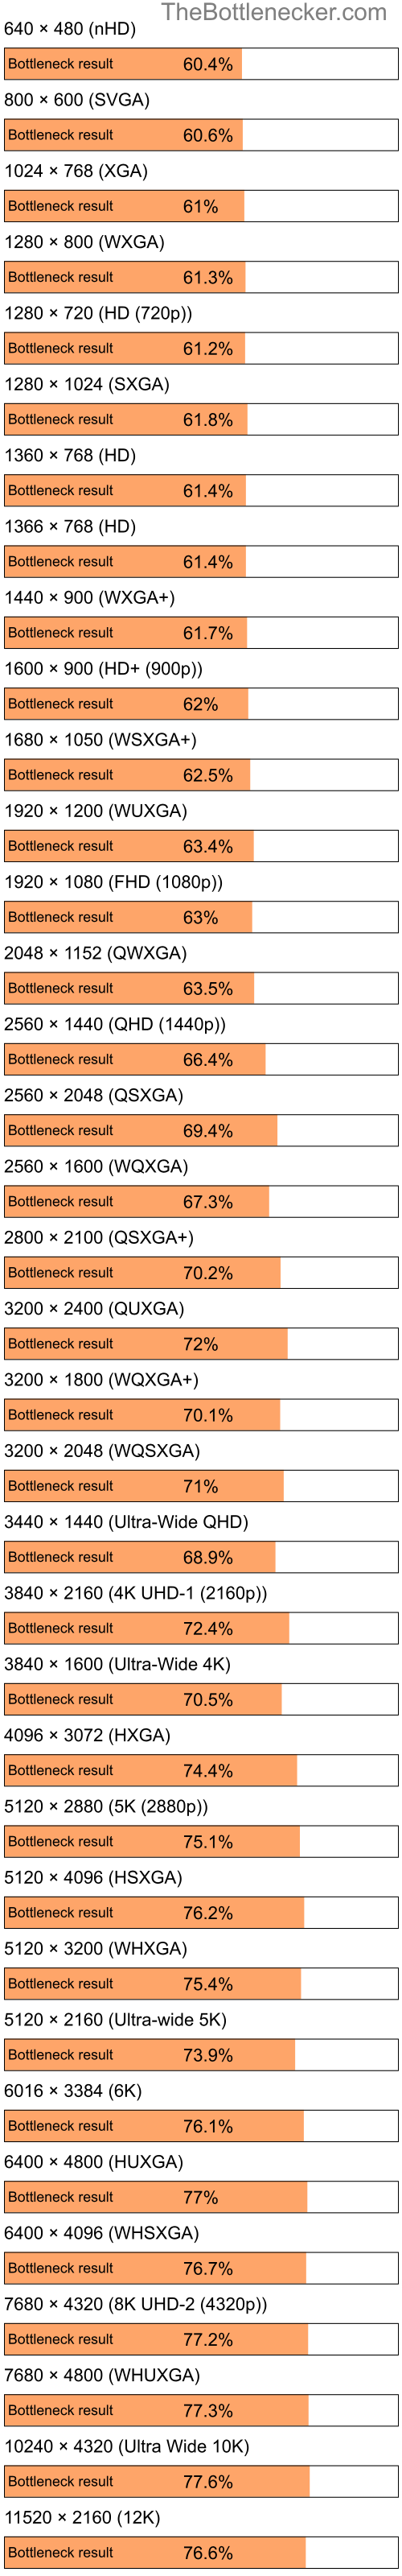 Bottleneck results by resolution for Intel Pentium 4 and AMD Mobility Radeon X1600 in General Tasks